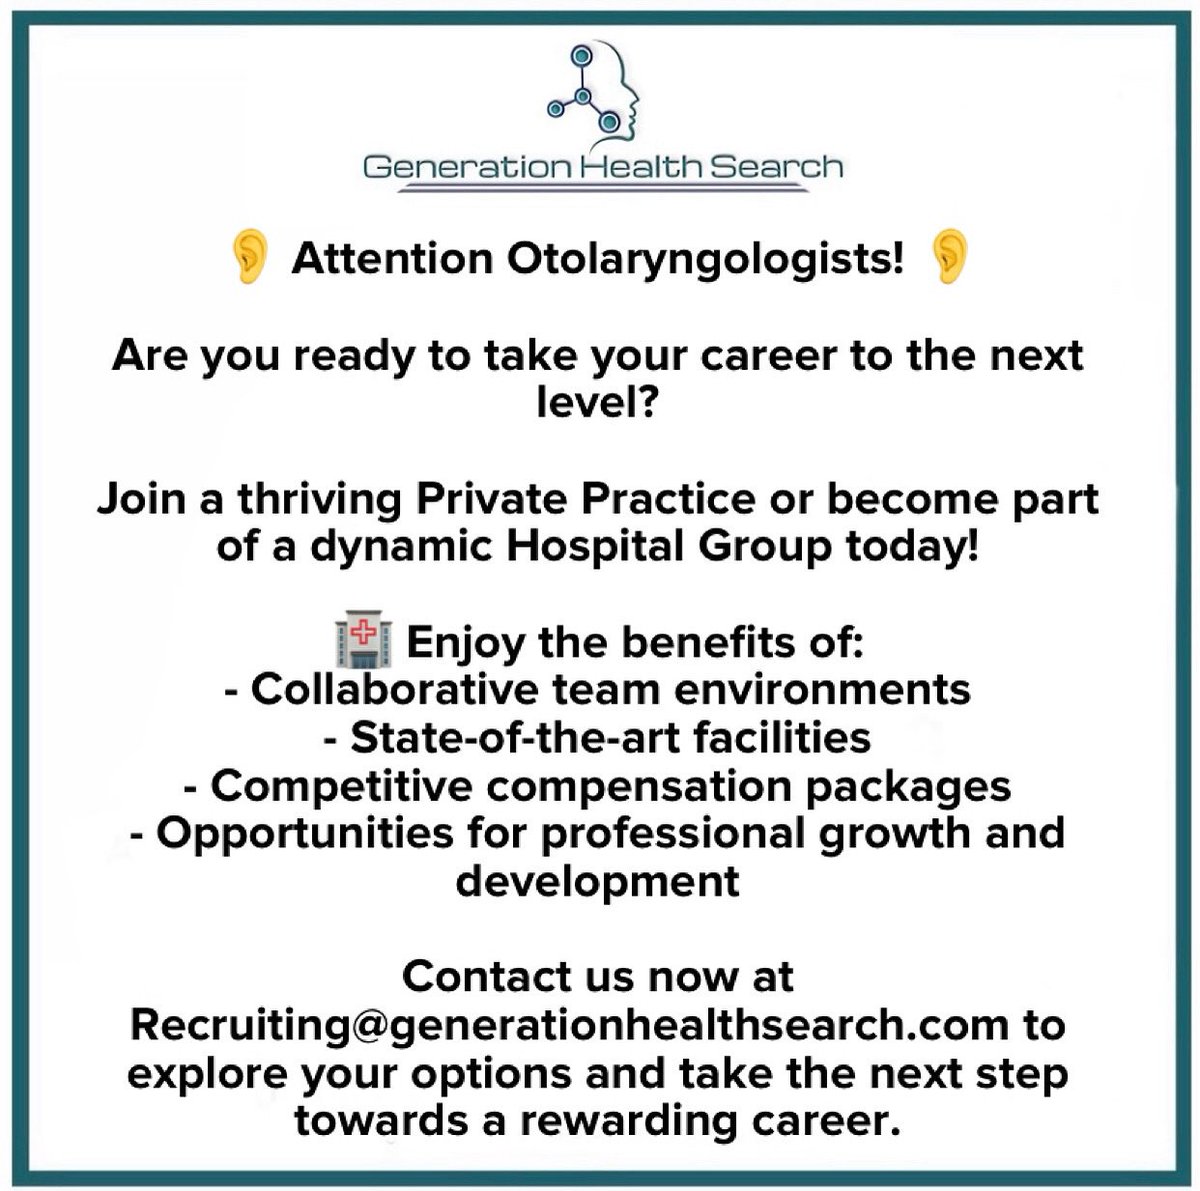 👂 Calling all Otolaryngologists! 👂 Join us at GFP or a leading Private Practice. Apply now! #ENTJobs #Otolaryngology #MedicalJobs #HealthcareCareers #HospitalJobs #PrivatePractice #GFP #NowHiring #ENT #Generationhealthsearch